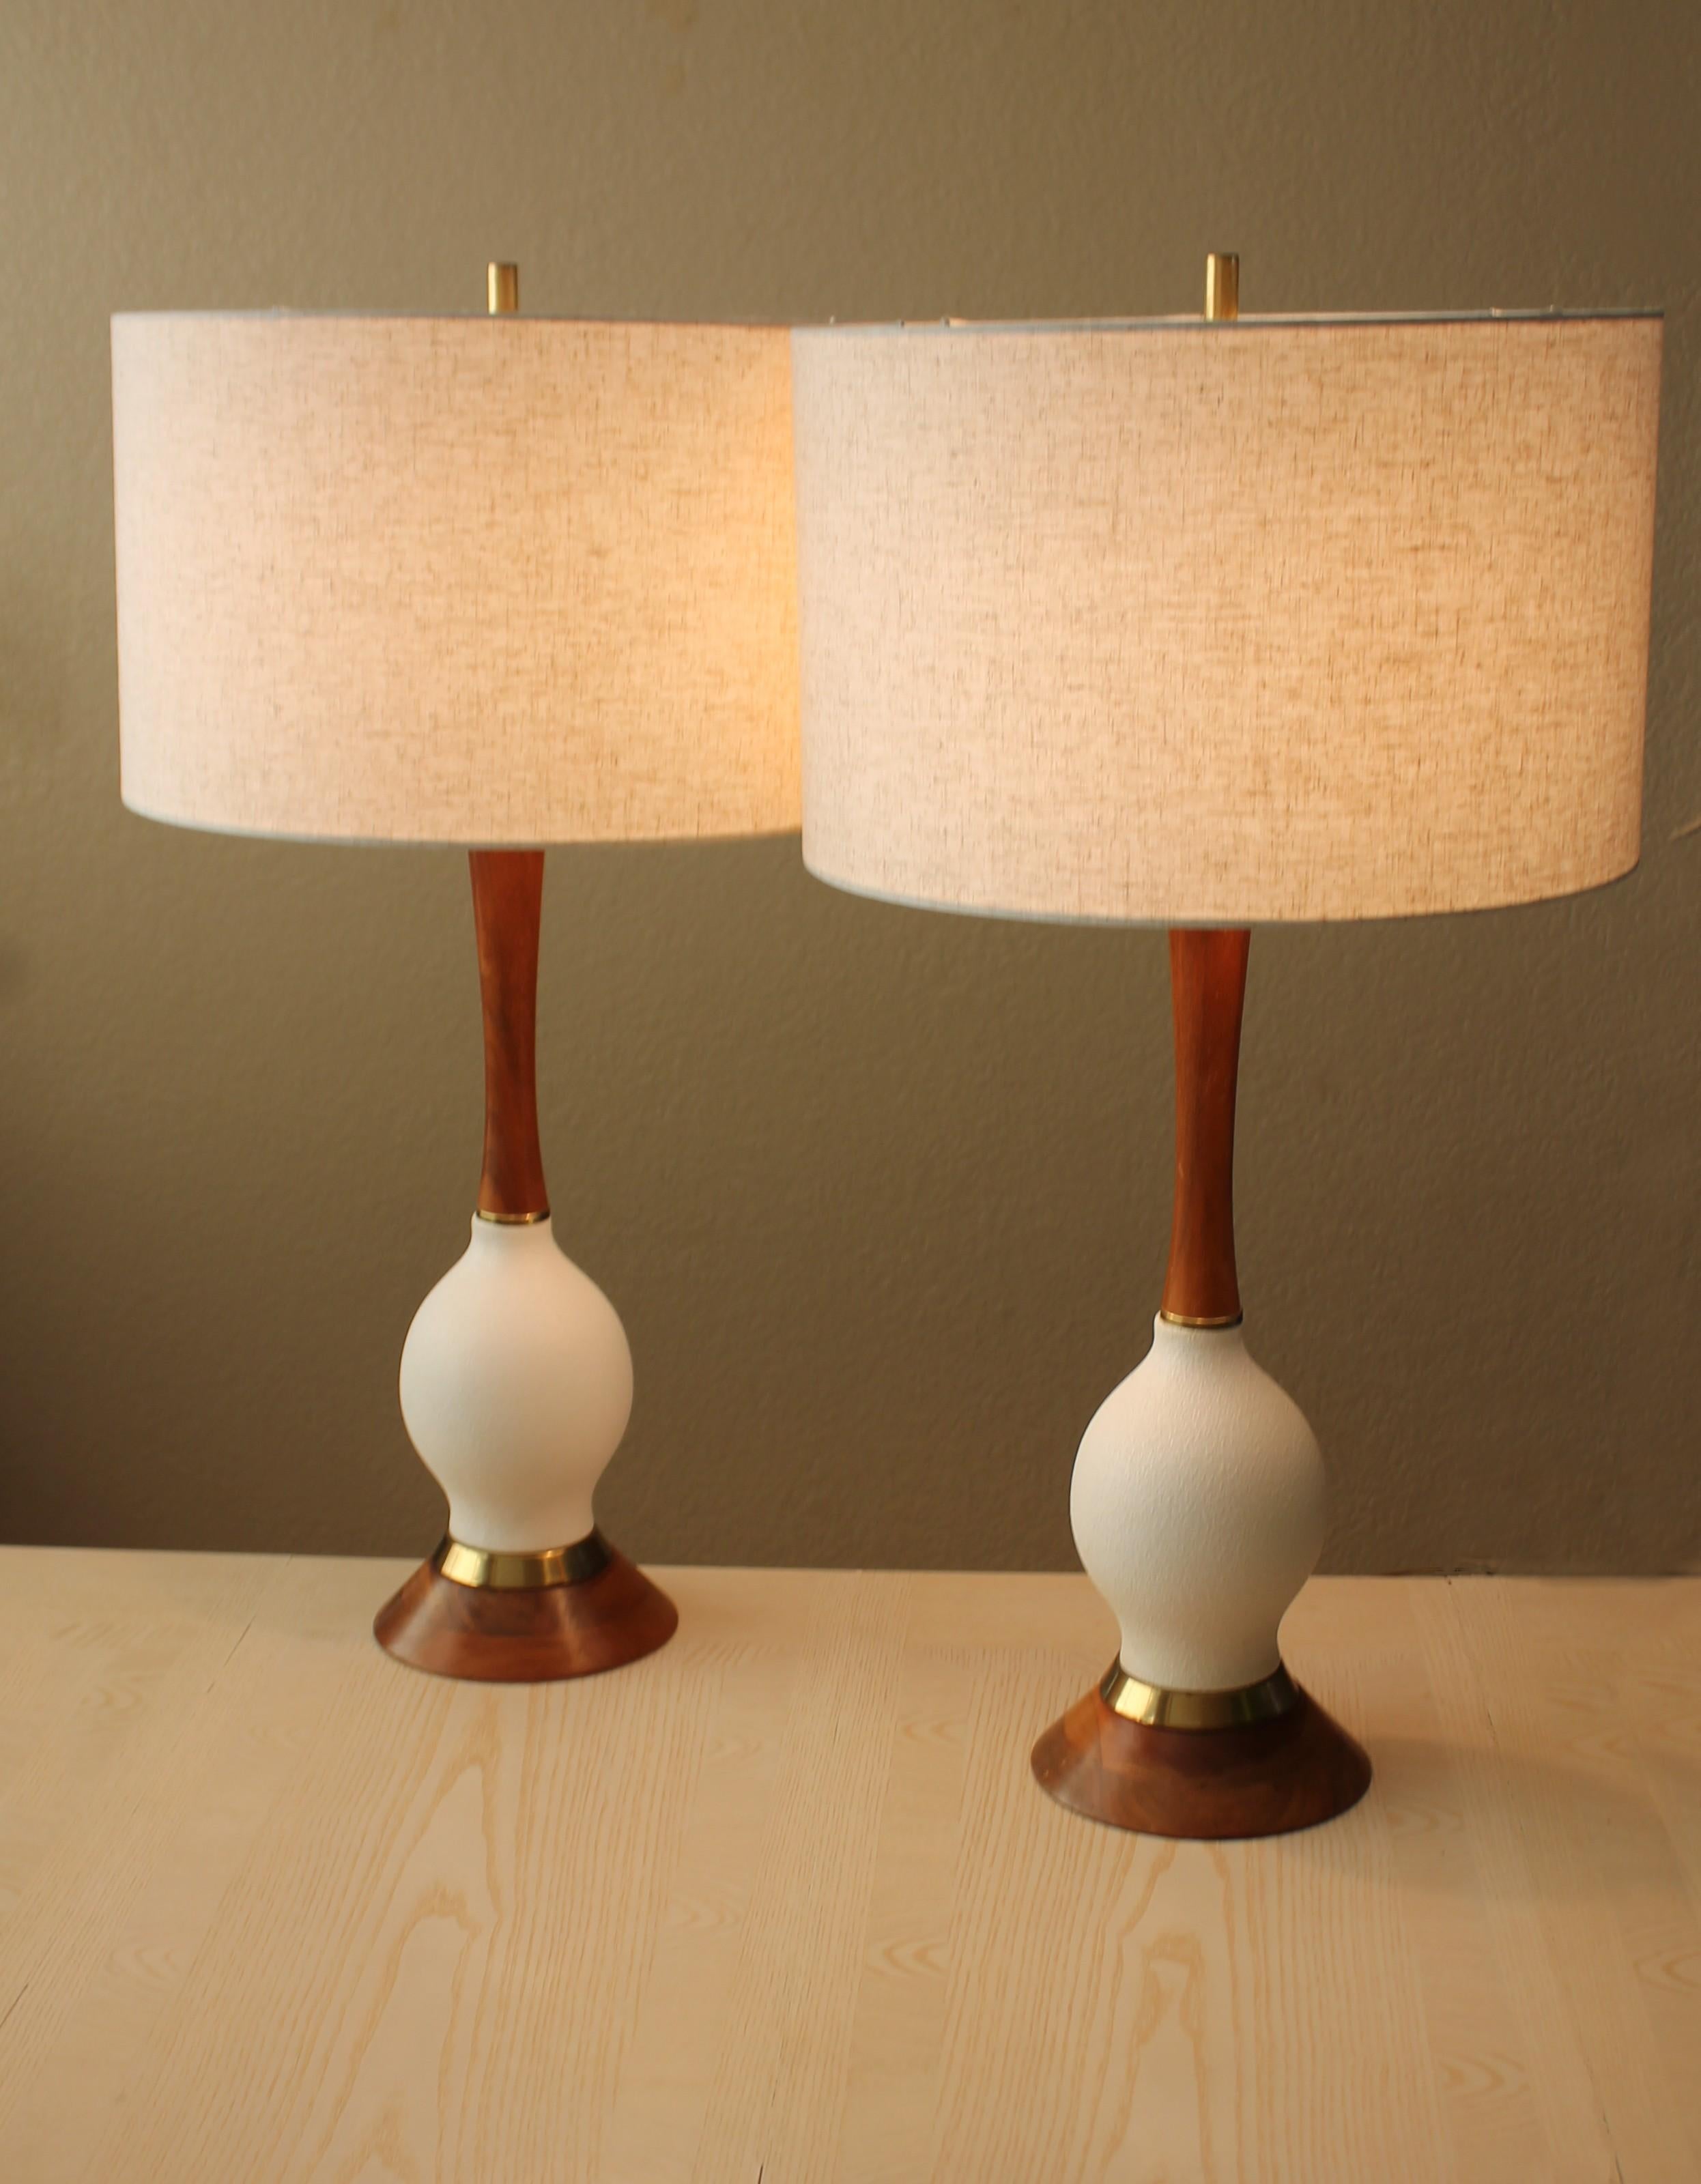 GORGEOUS!
  
PAIR!

HAND CARVED 
DANISH MODERN
TEAK, WALNUT & BRASS TABLE LAMPS!

Gorgeous Danish Modernism!

Simply Beautiful!

DIMENSIONS:  APPROX. 31